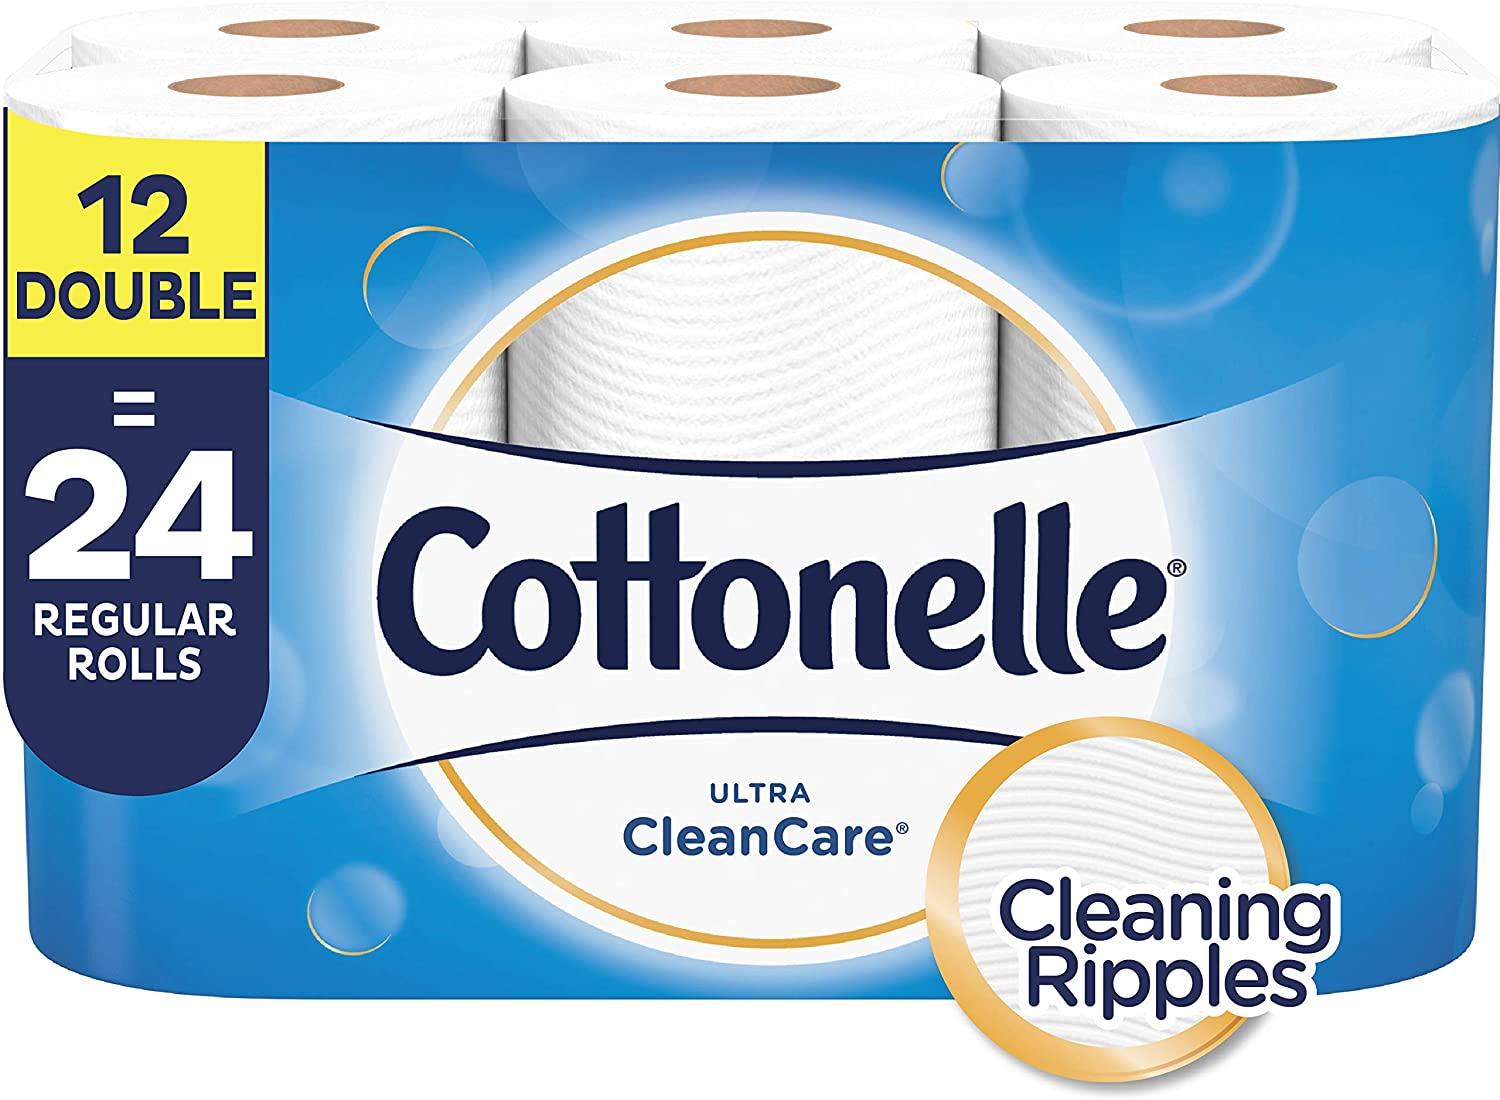 12 Cottonelle Toilet Papers for $4.99